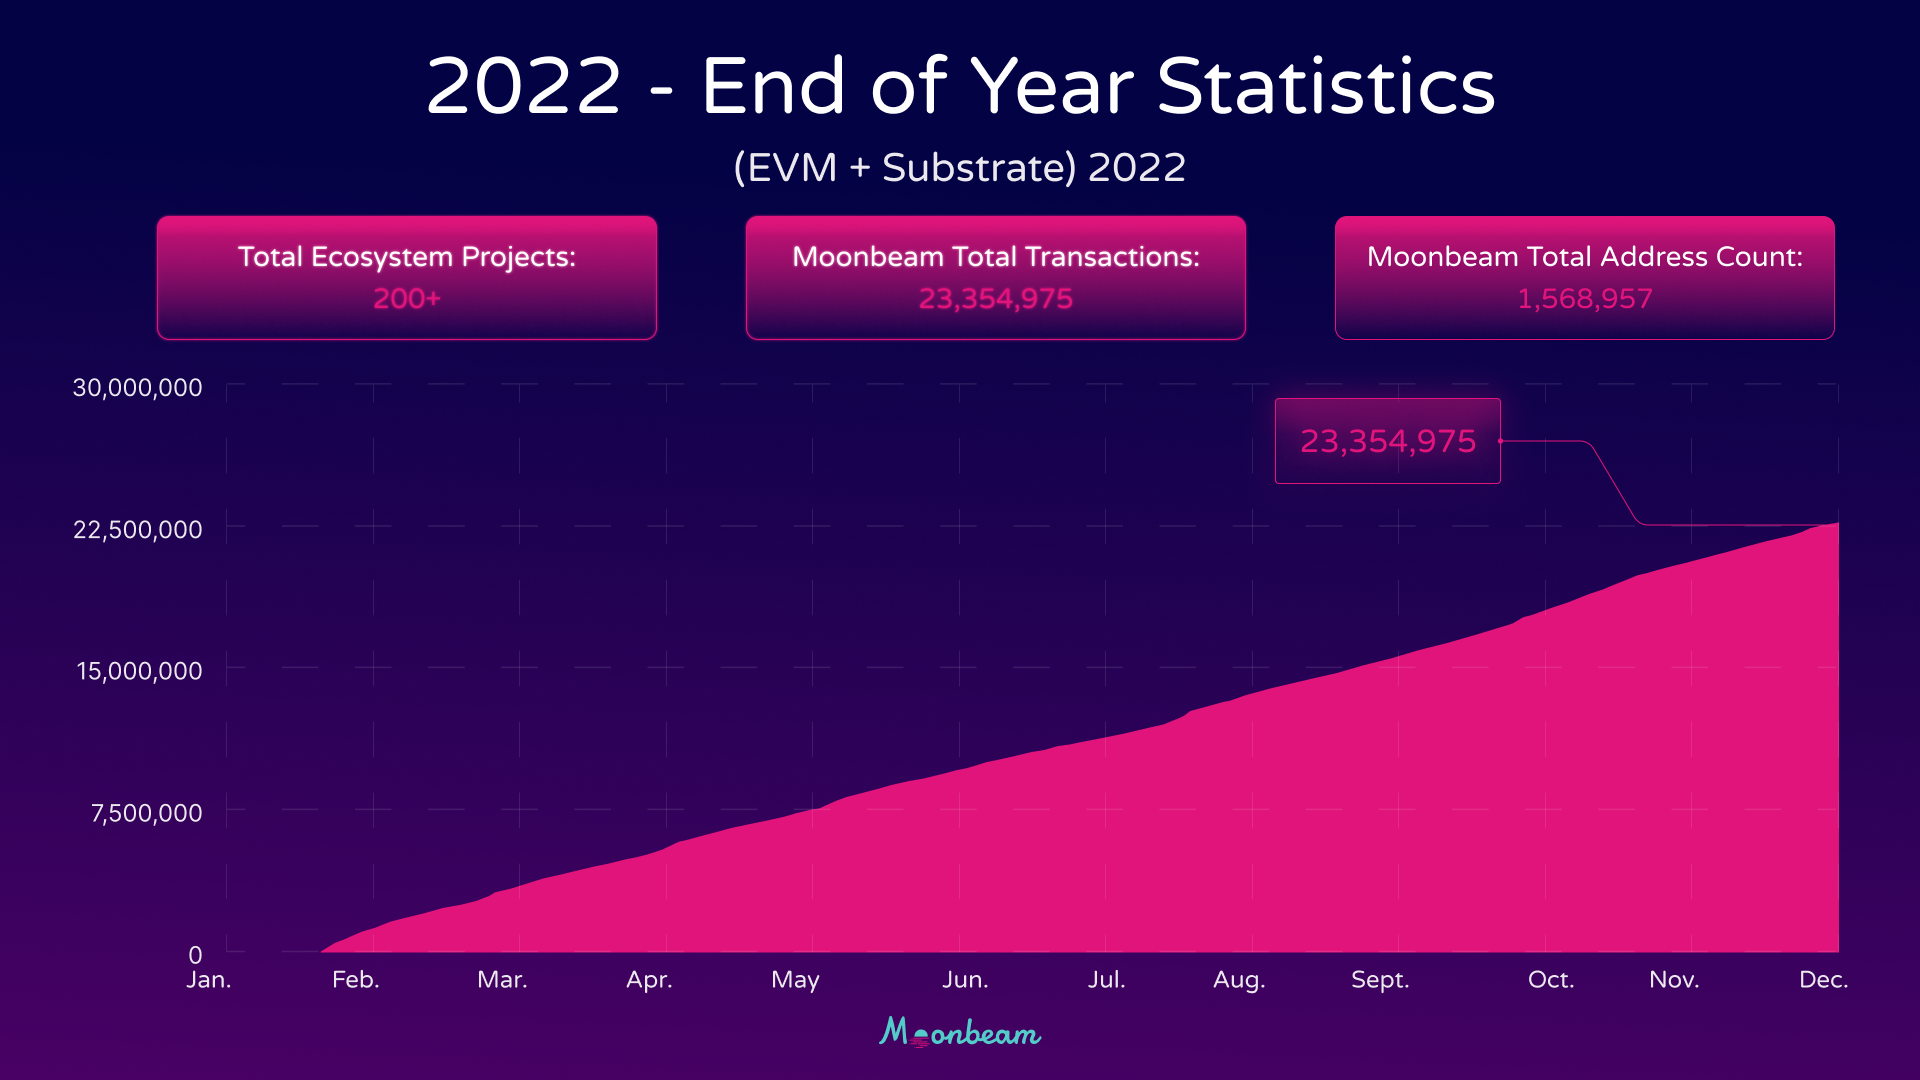 End of year statistics graph for 2022, detailing total ecosystem projects, Moonbeam total transactions, and address count